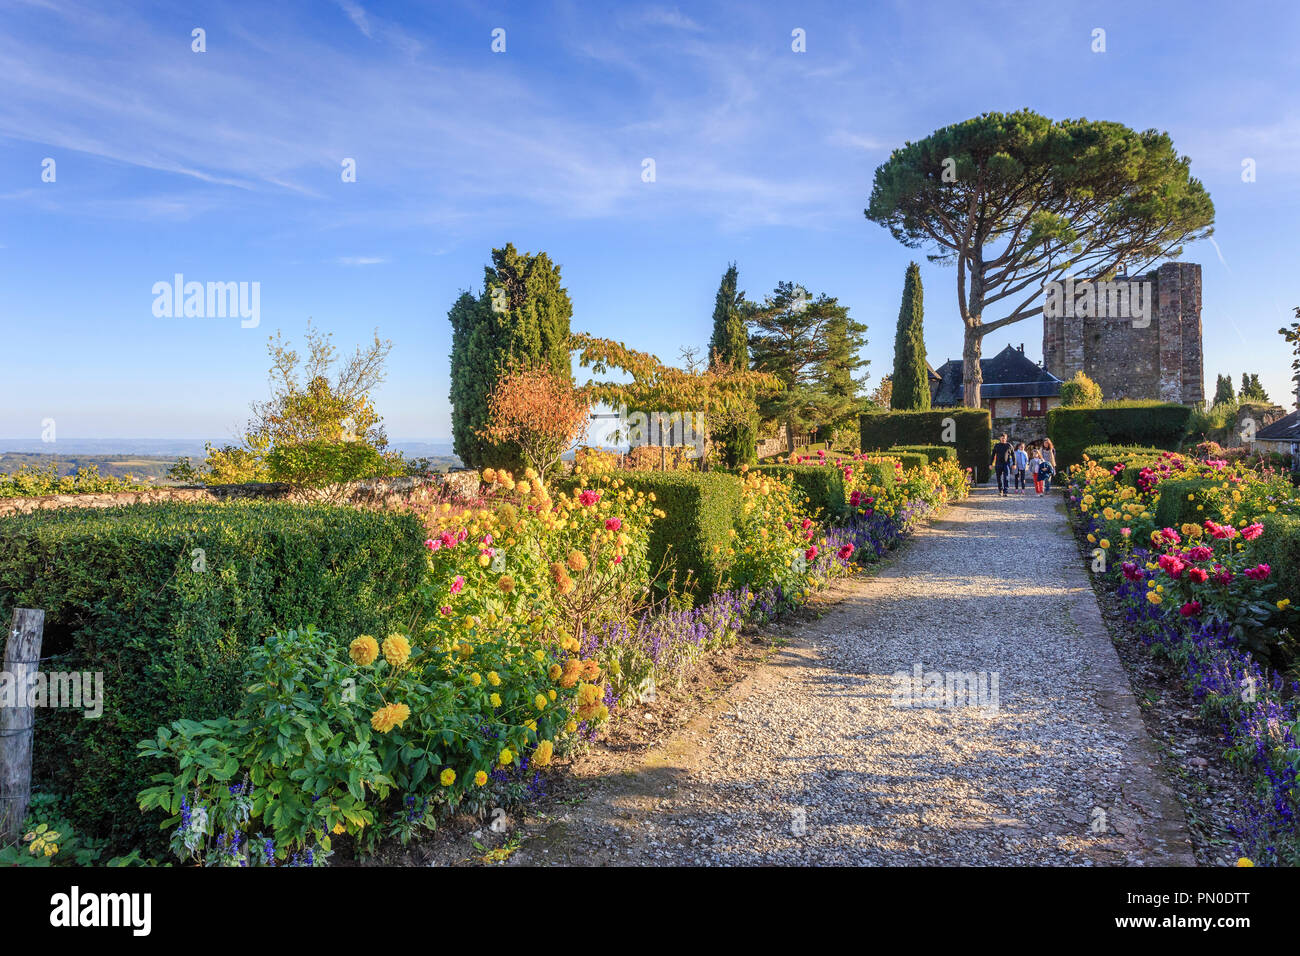 France, Correze, Turenne, labelled Les Plus Beaux Villages de France (The Most Beautiful Villages of France), the French formal garden of the castle a Stock Photo